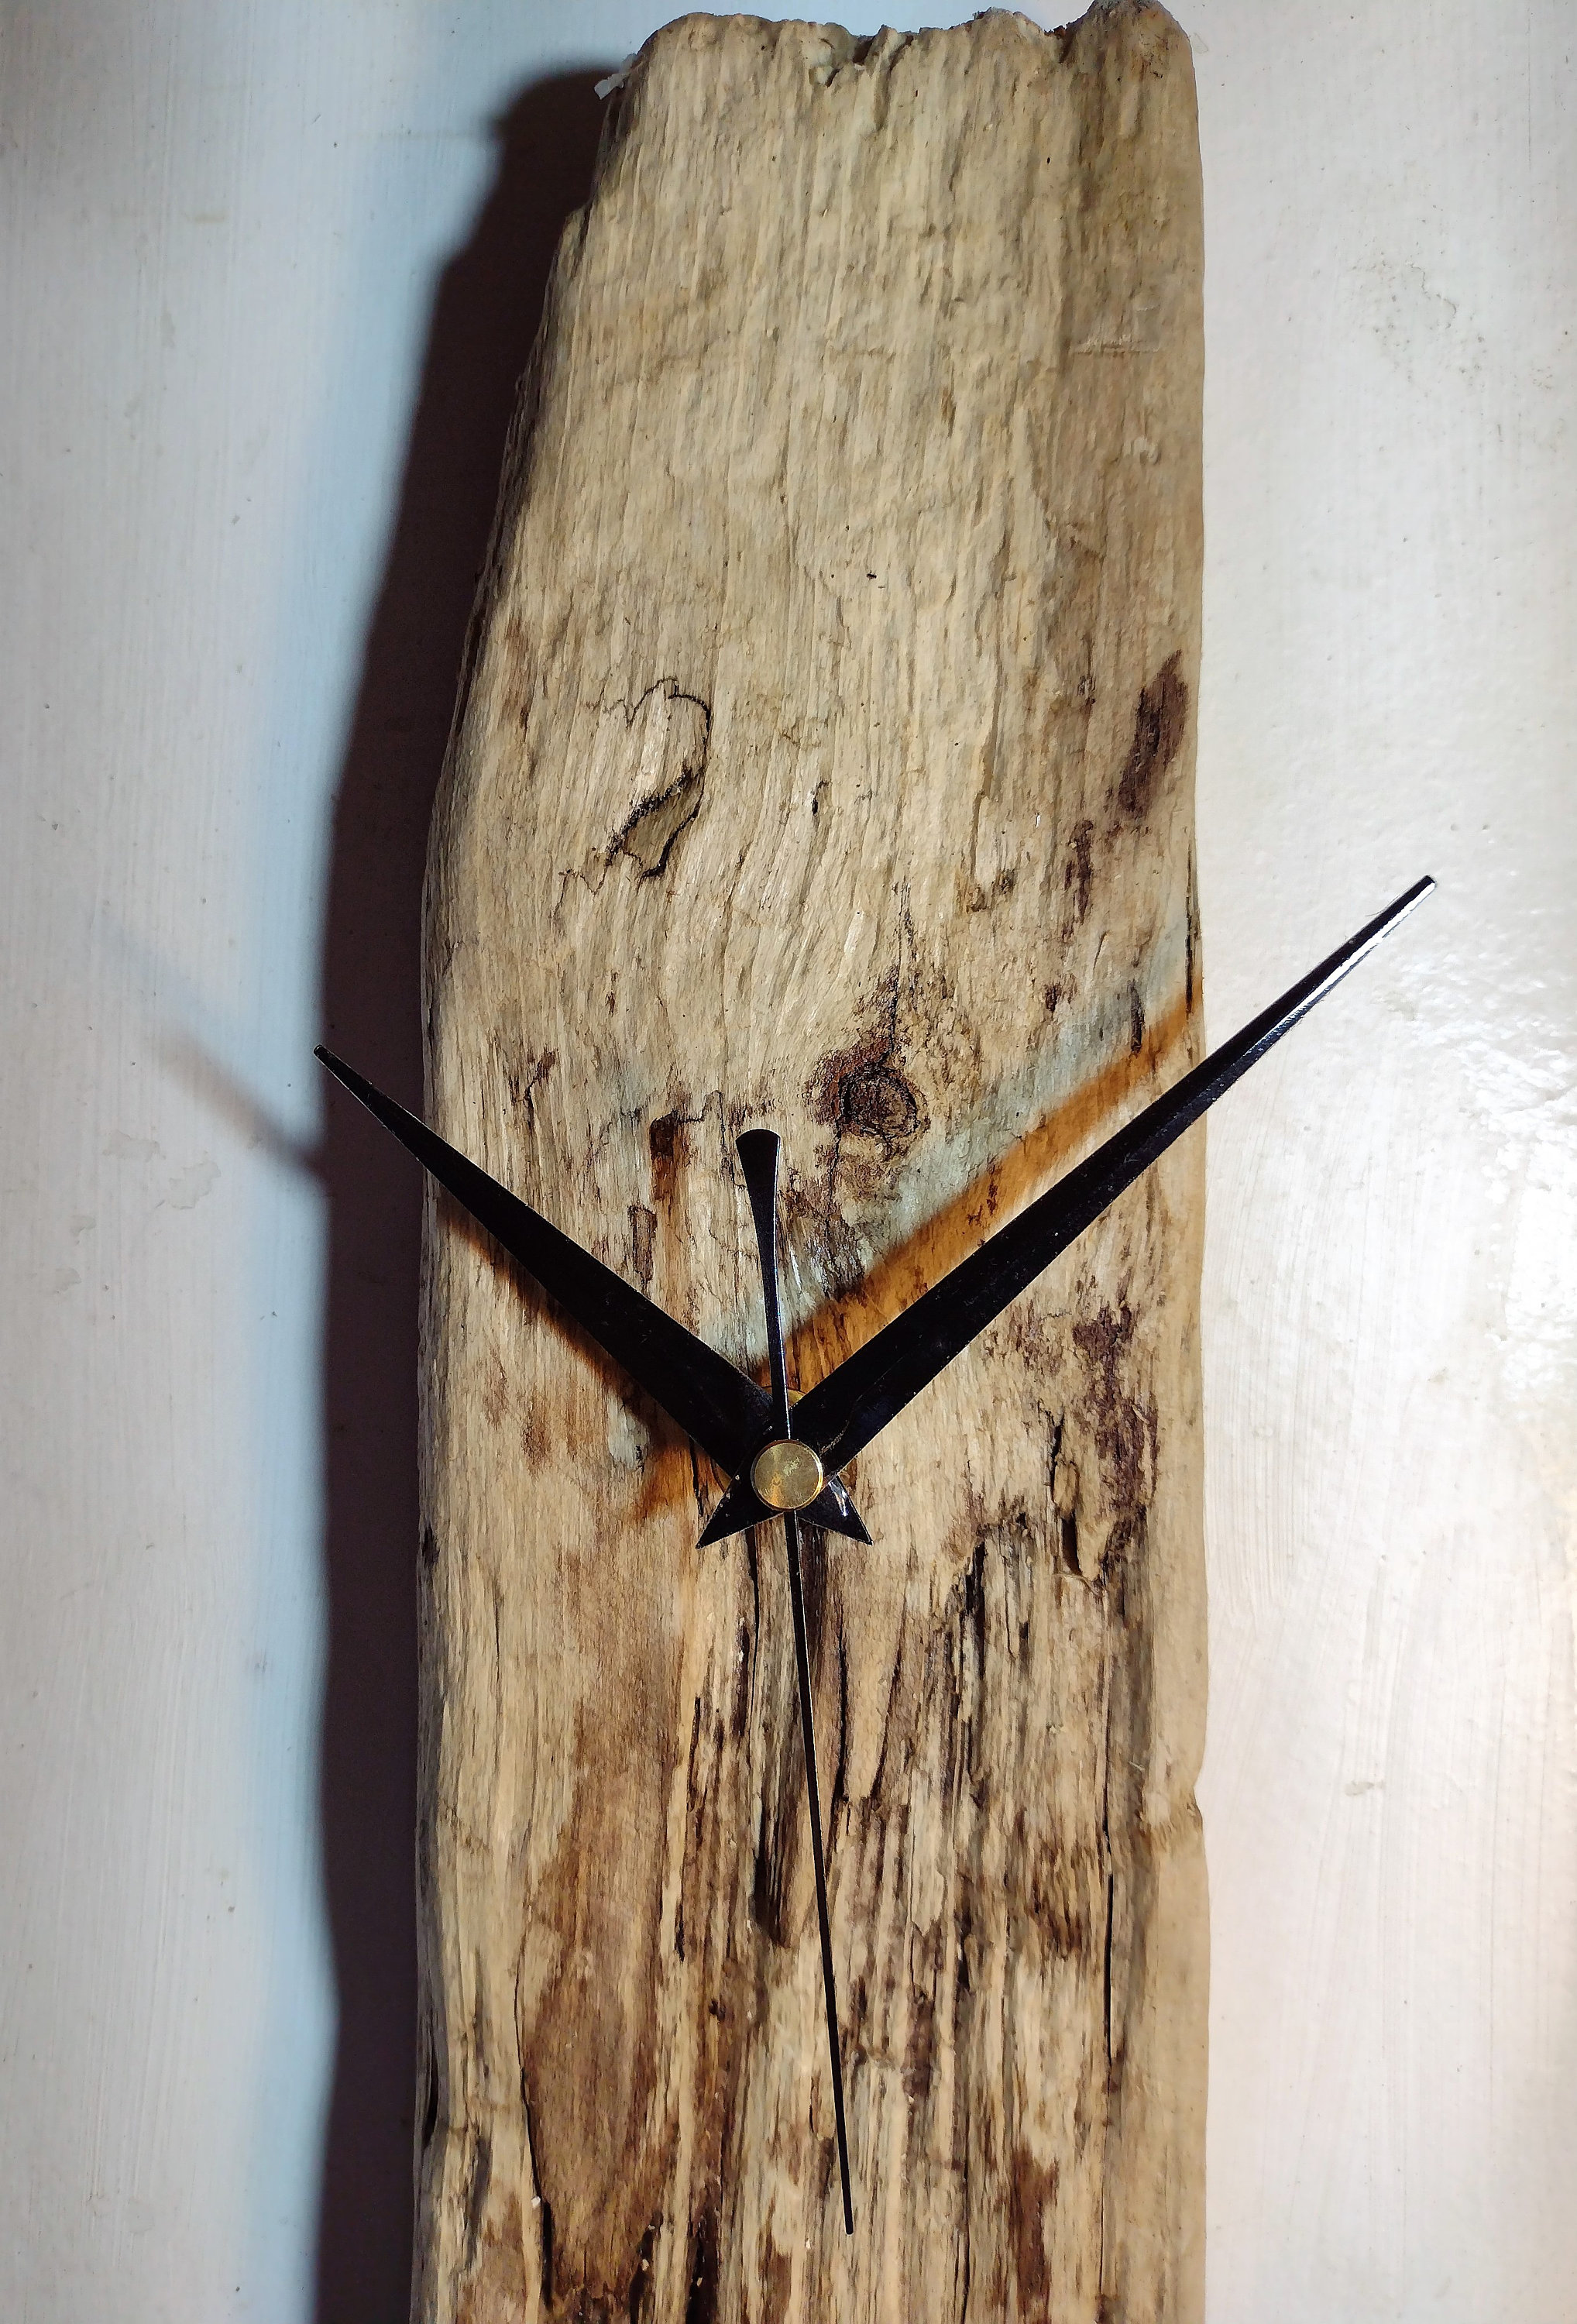 Unique Handmade Driftwood Wall Clock with silent sweep | Etsy